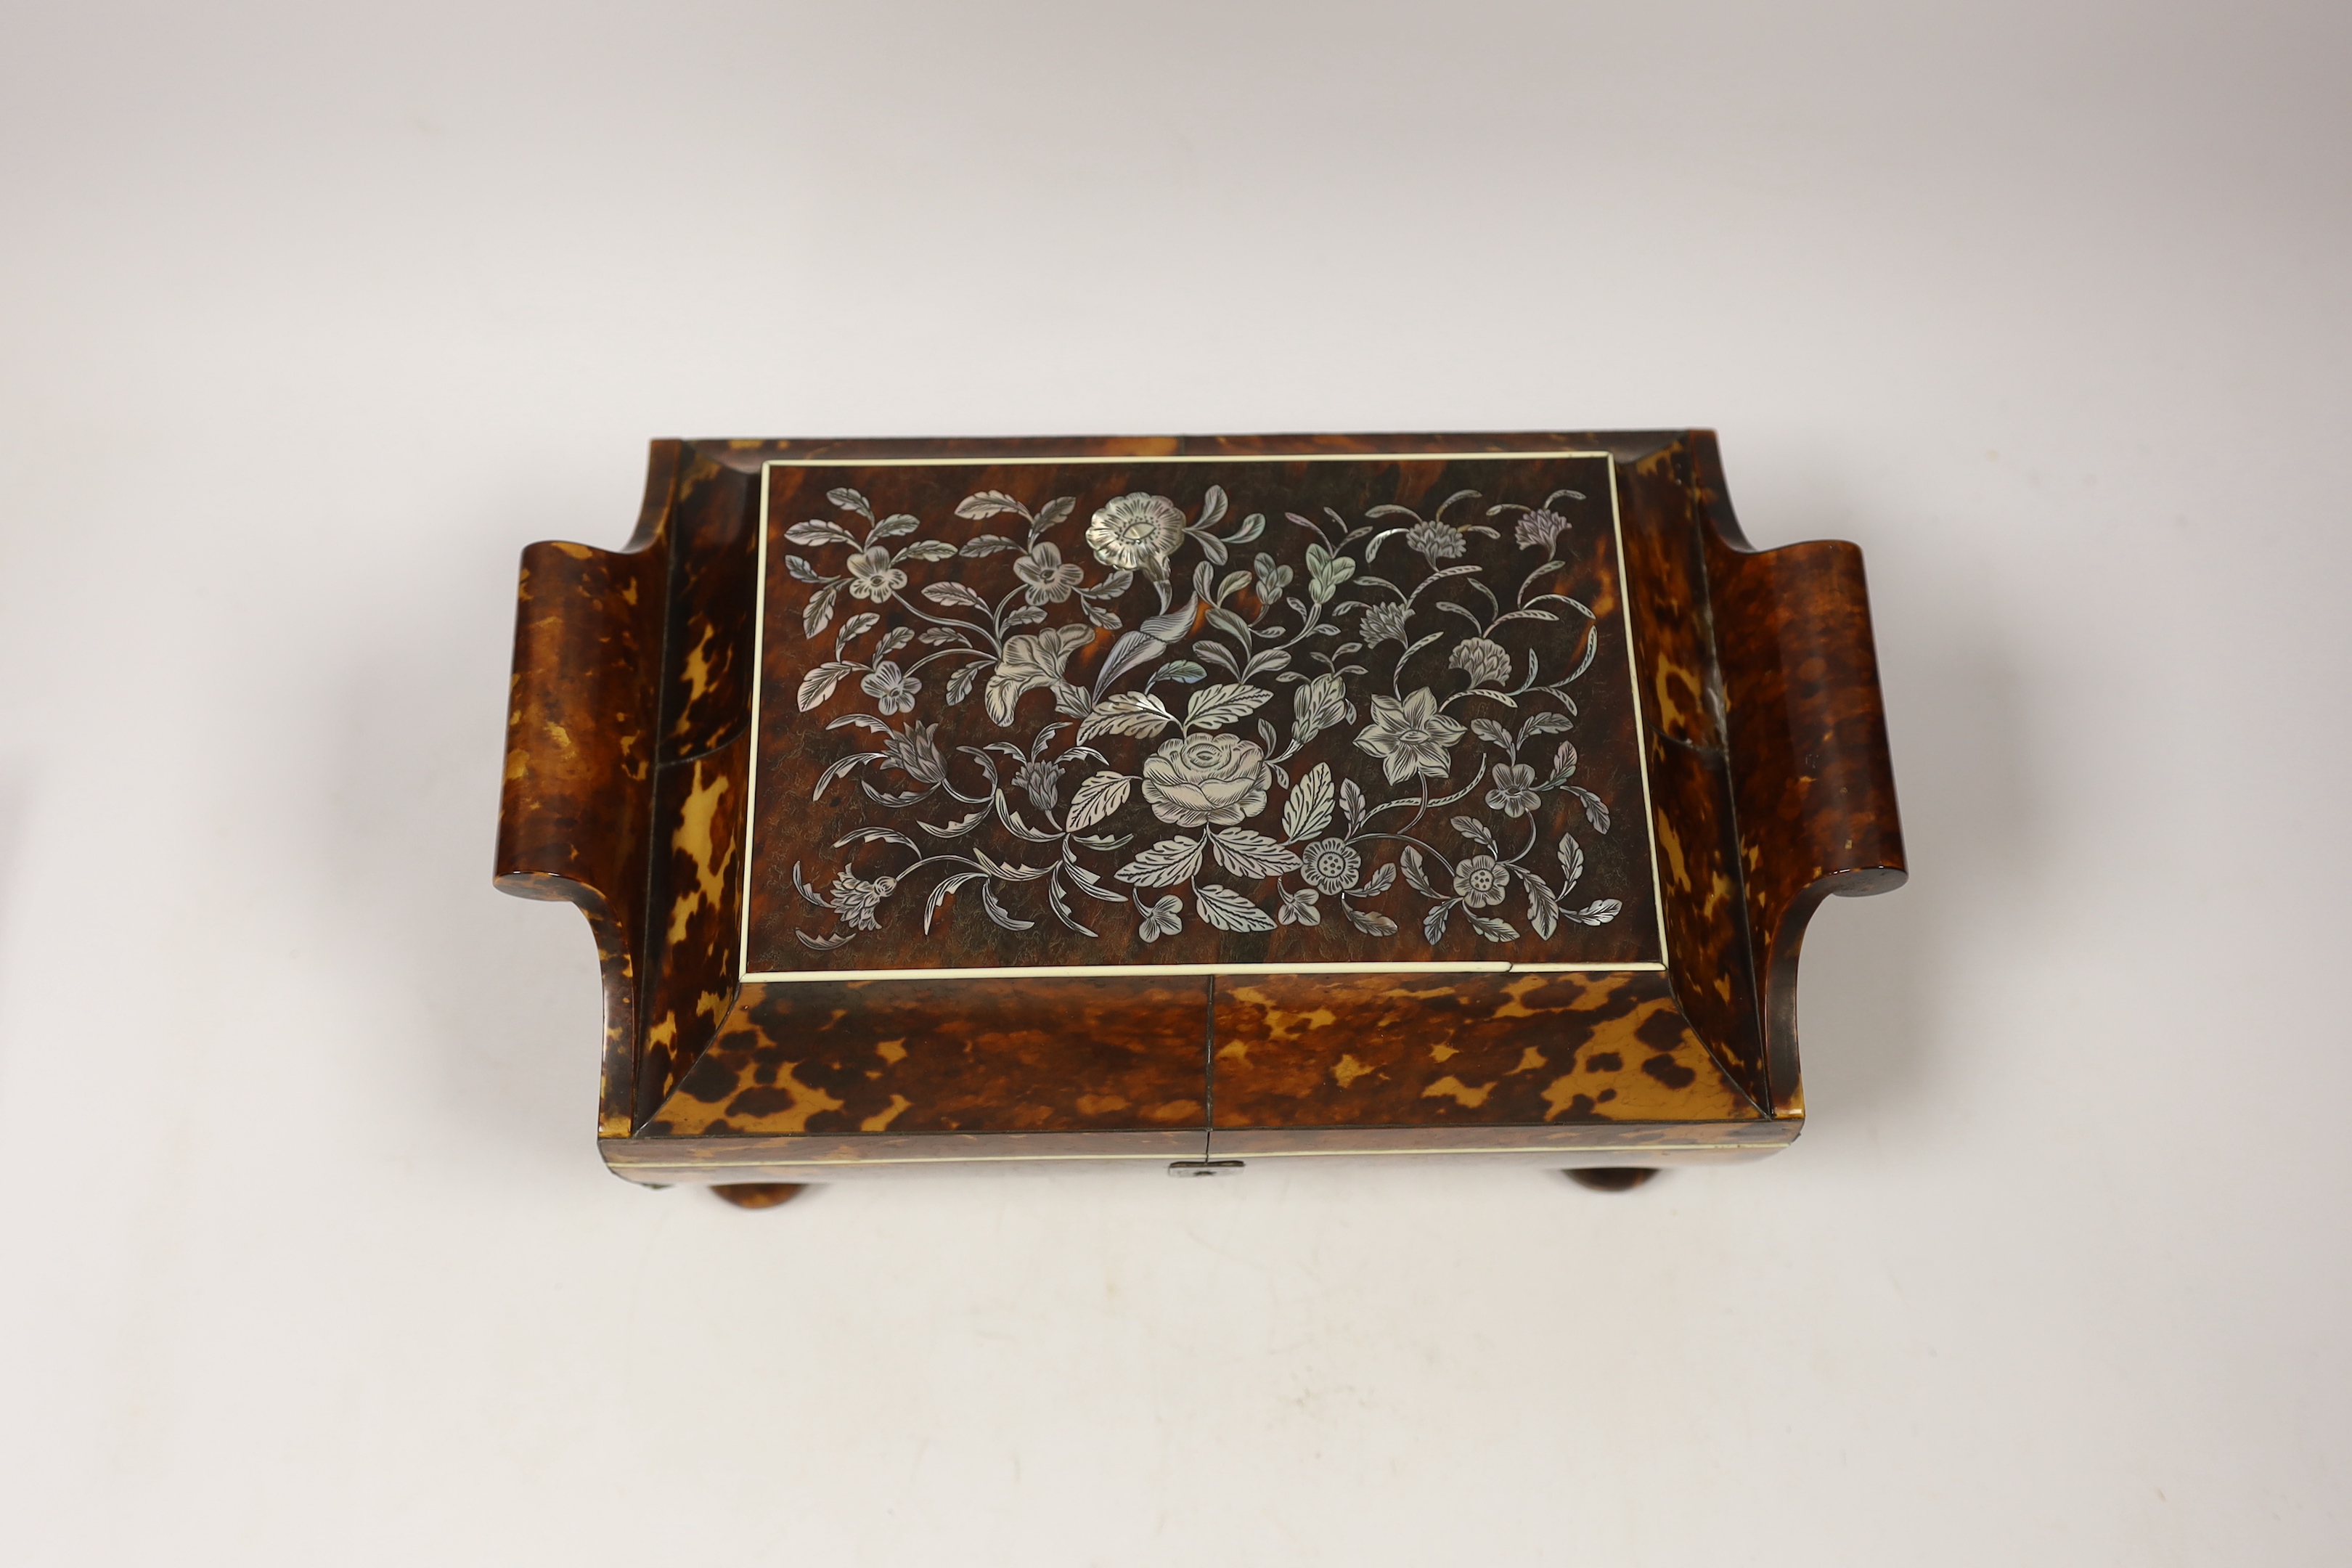 An early 19th century tortoiseshell and mother of pearl inlaid work box with ivory banding, 24cm wide, 16cm deep, 12cm high CITES Submission reference, EWCE2JLY